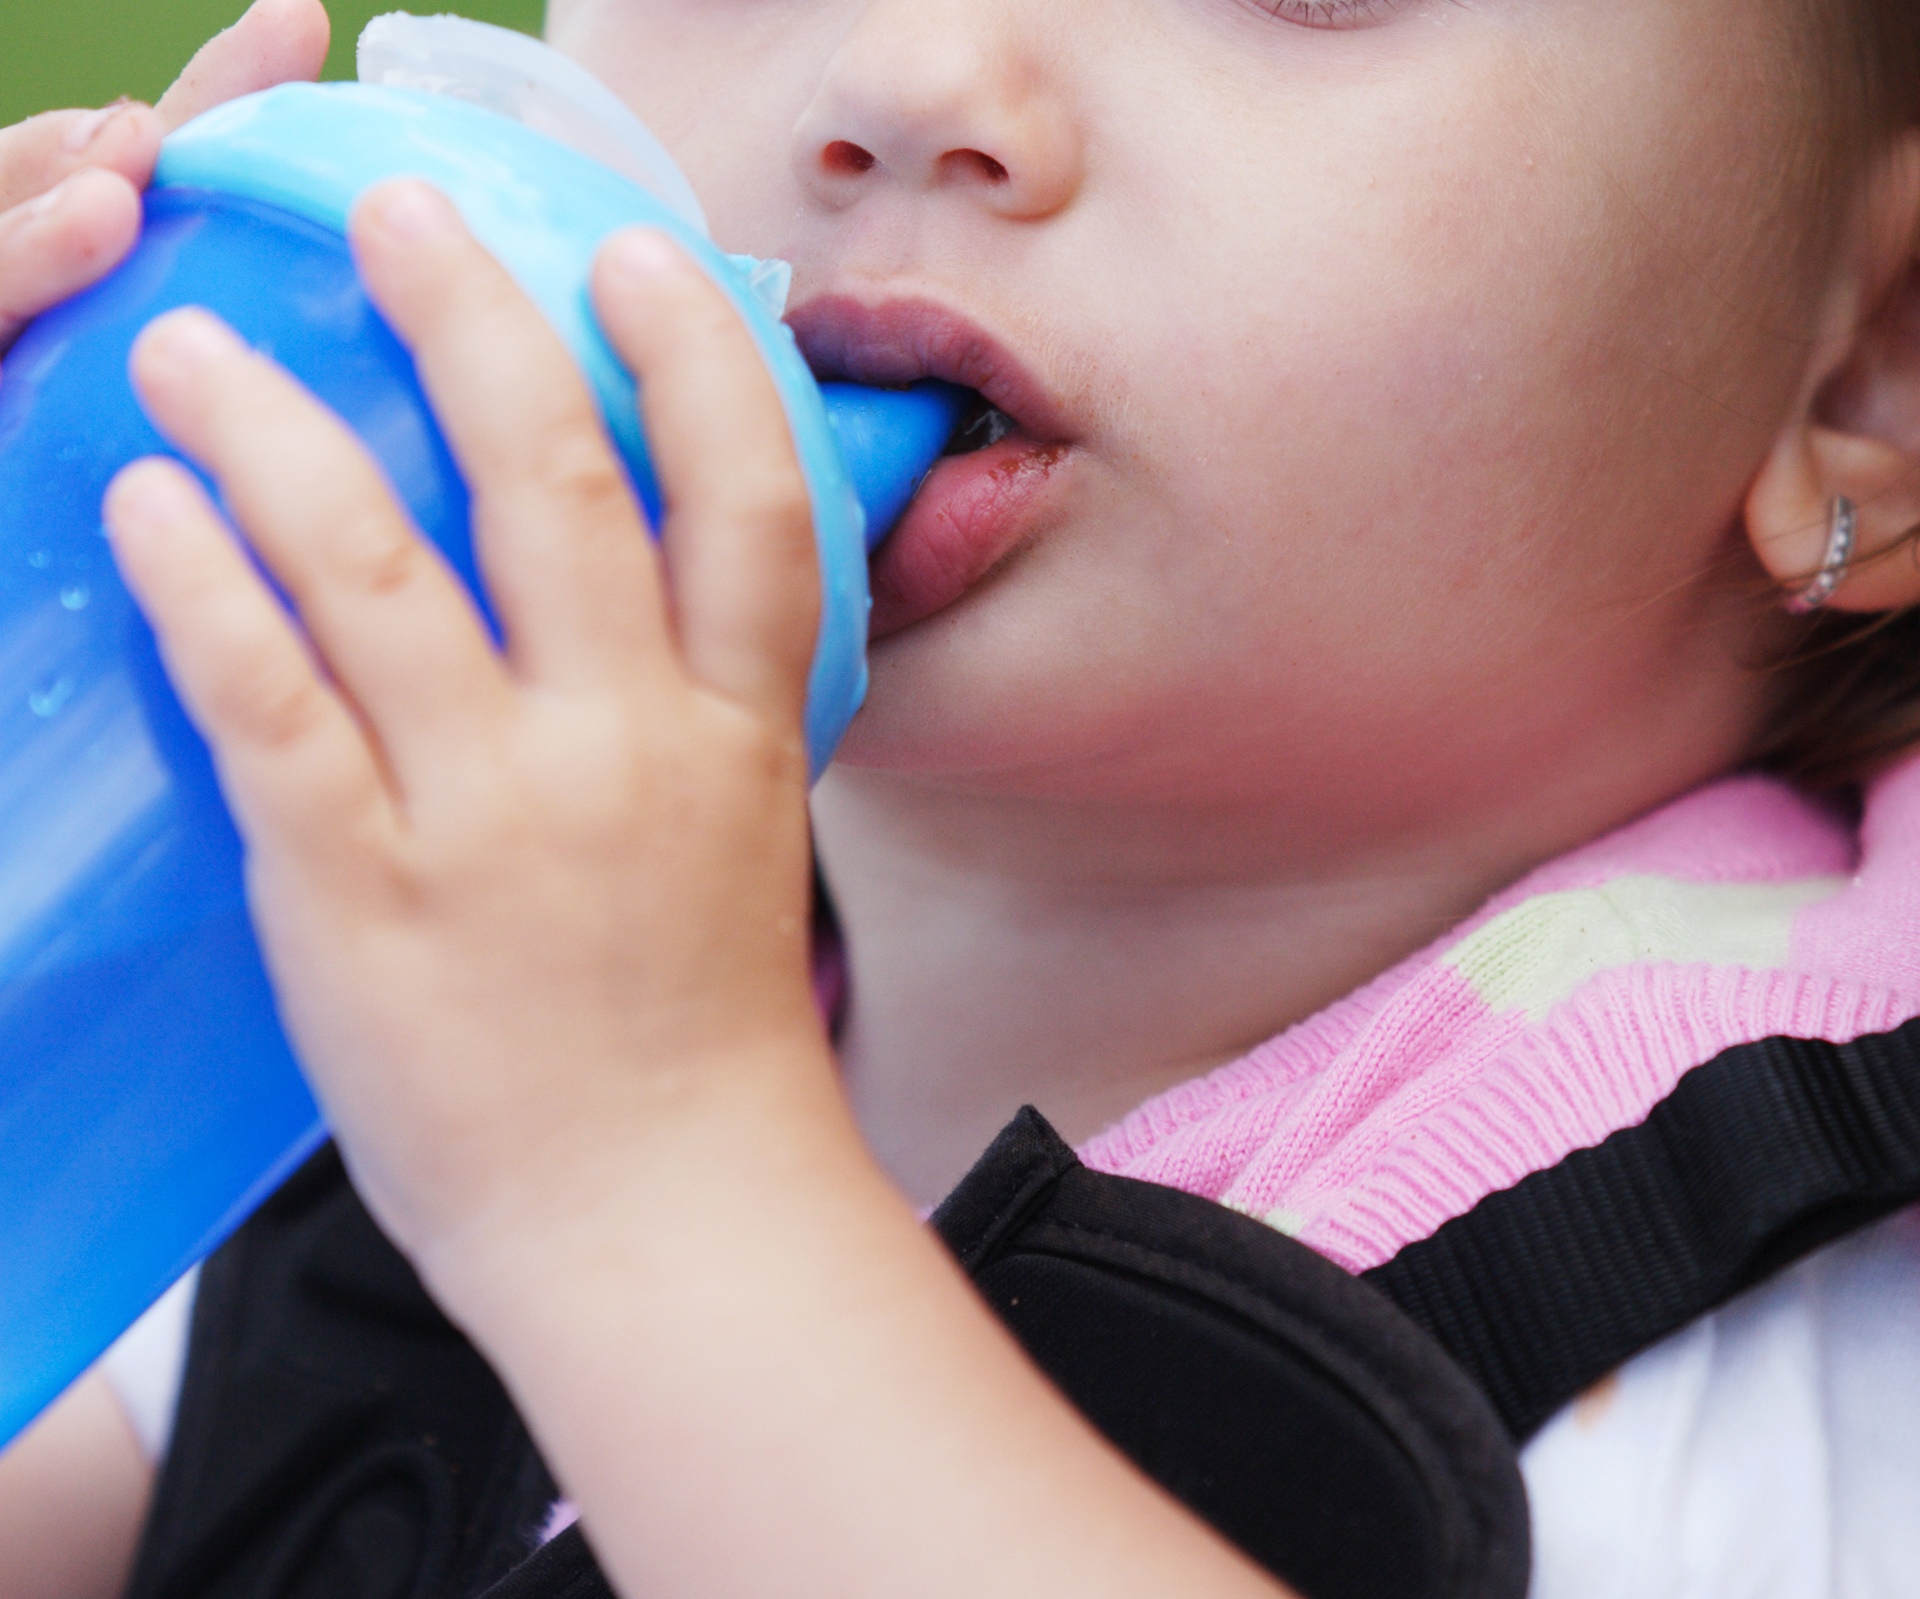 Toddler gets second degree burns from sippy cup at daycare